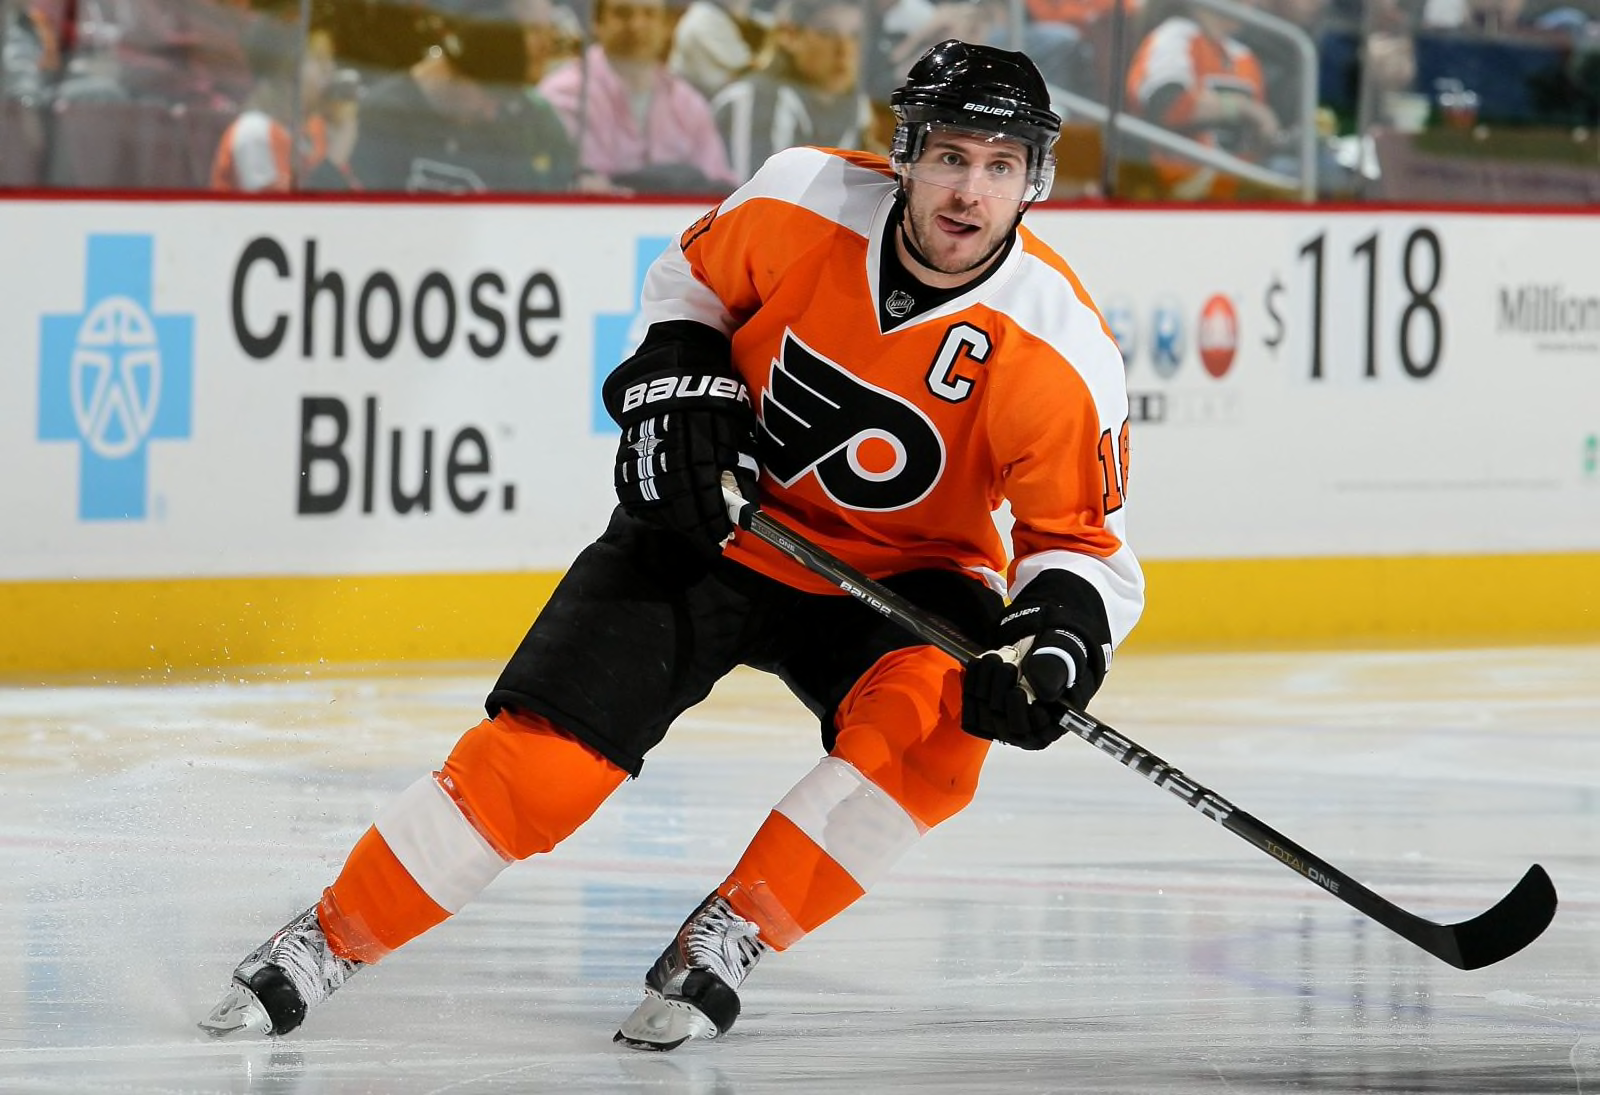 Mike Richards lifts Flyers to 5-3 victory over struggling New